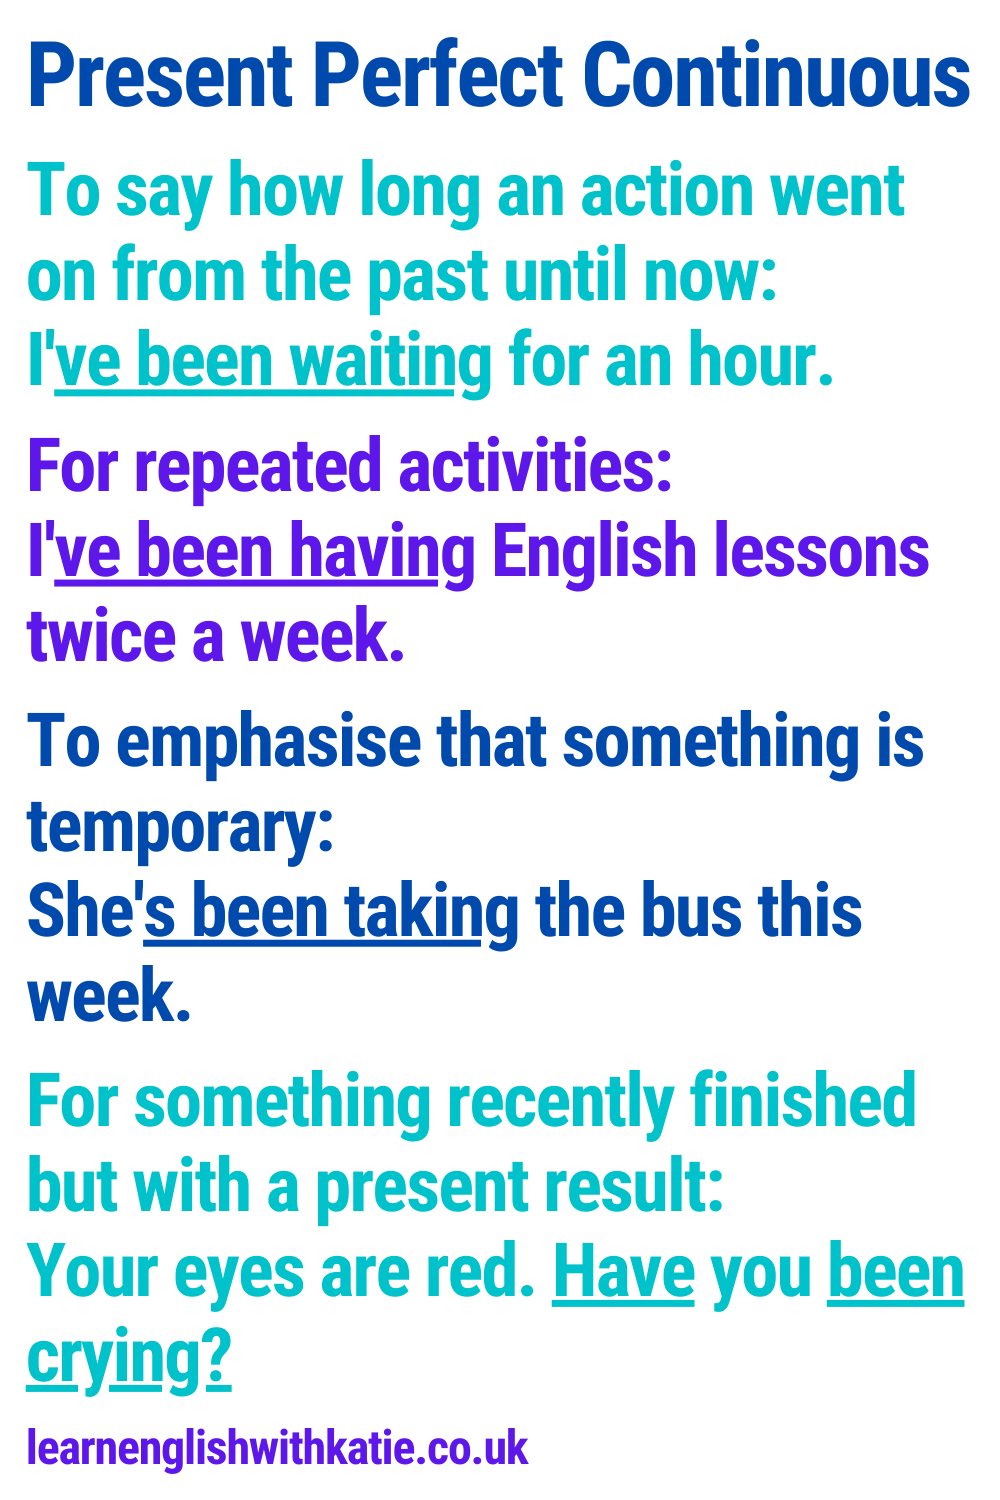 Infographic pinterest pin showing different uses of the present perfect continuous